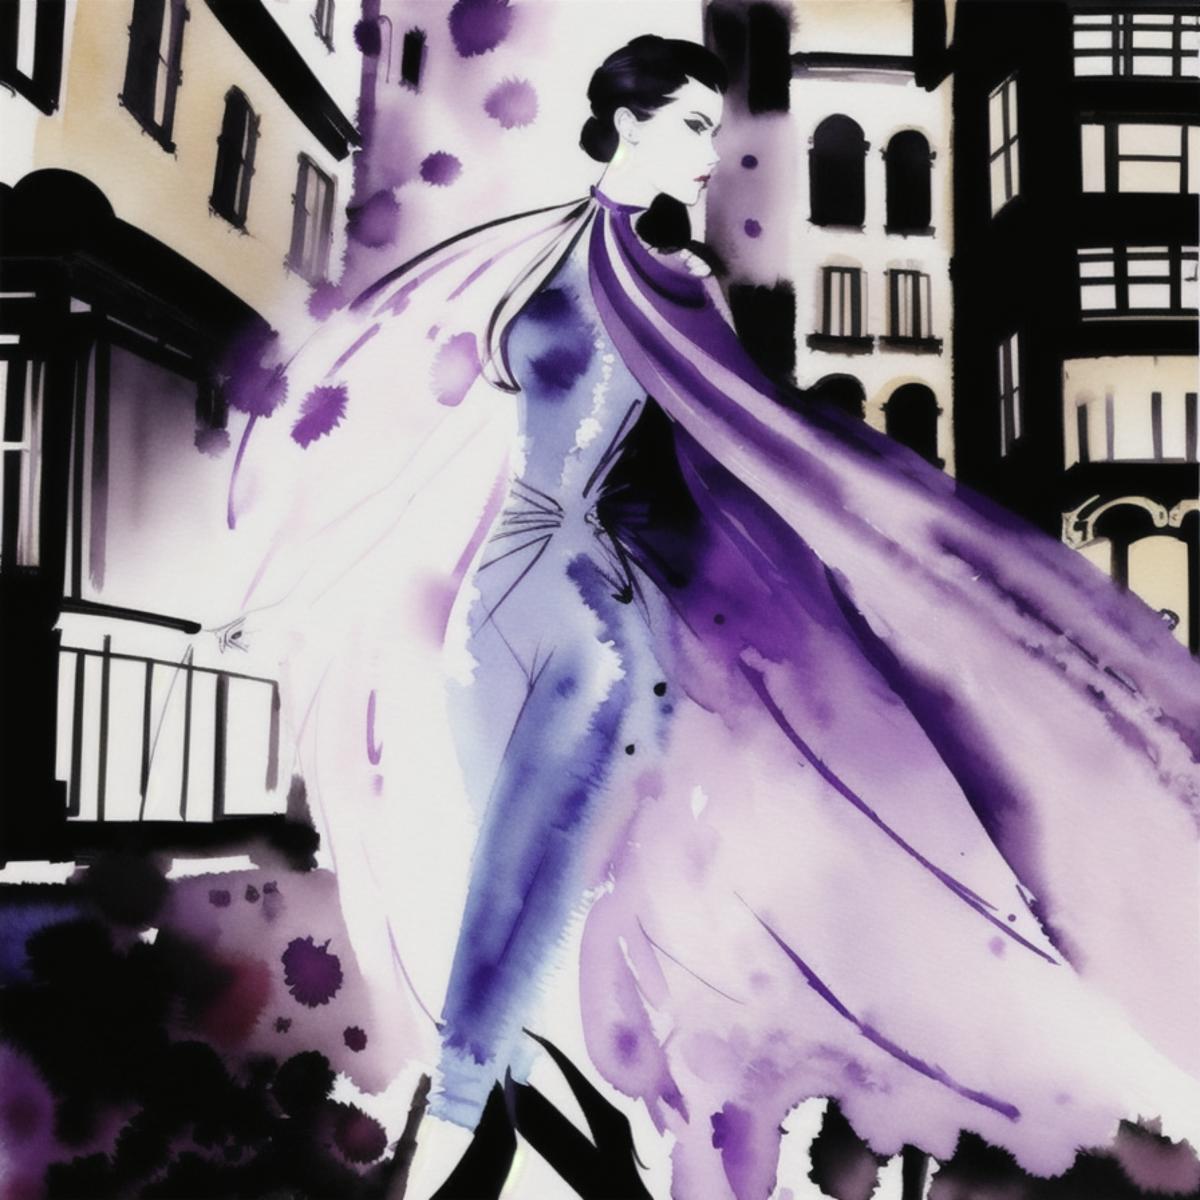 fashion watercolor image by unknowncity